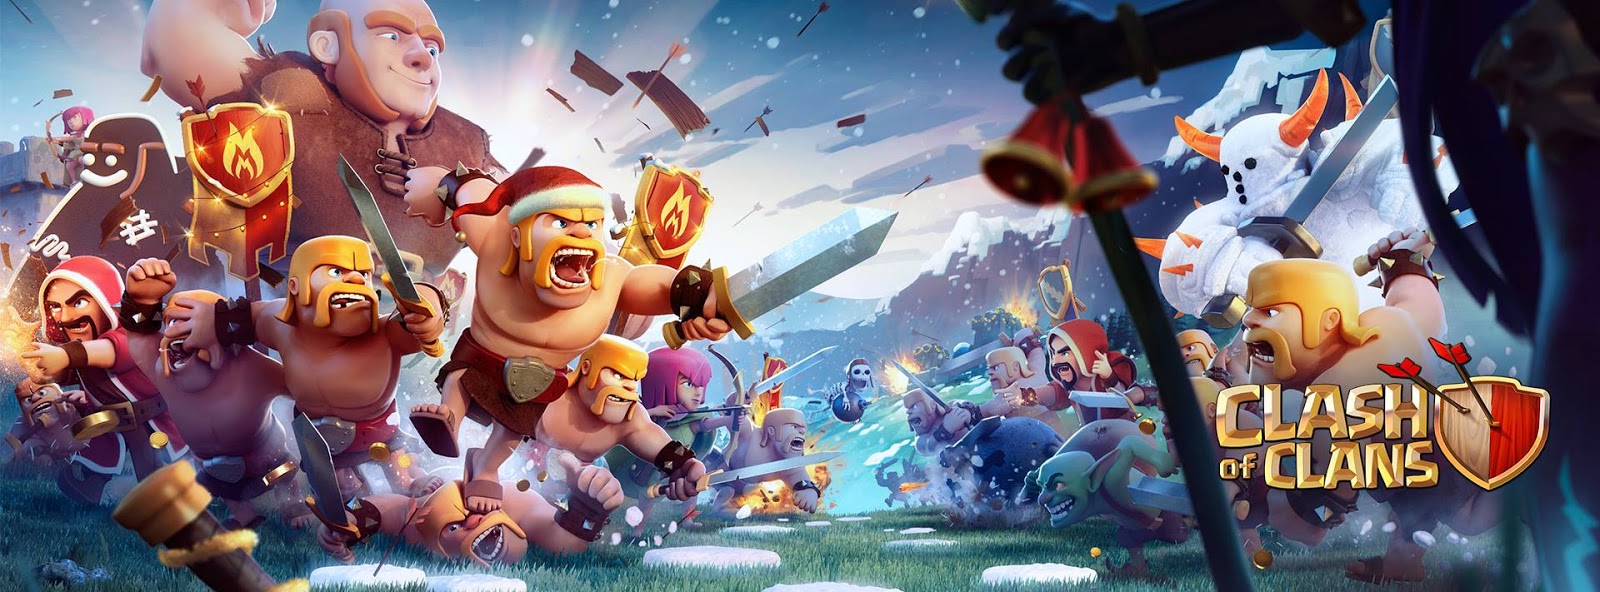 Clash Of Clans Christmas Update 2017 Apk Download